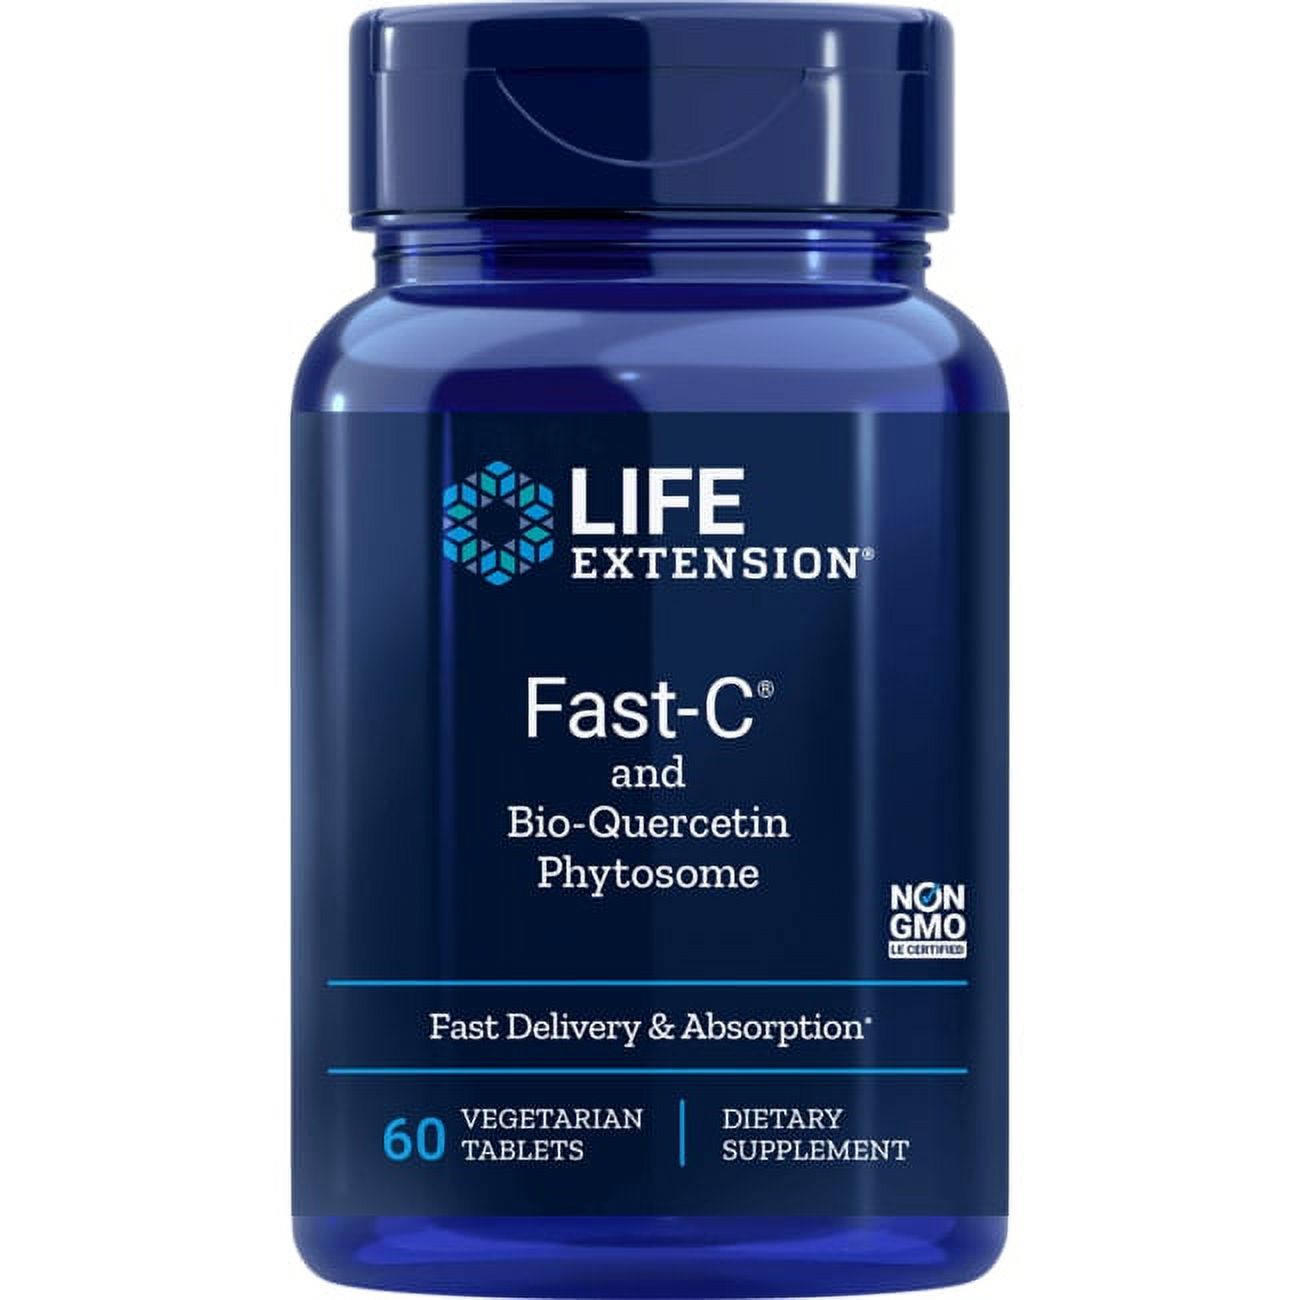 Life Extension Fast-C® and Bio-Quercetin® Phytosome - Fast delivery & absorption for optimum immune support - Gluten-Free, Non-GMO - 60 Vegetarian Tablets - image 1 of 2